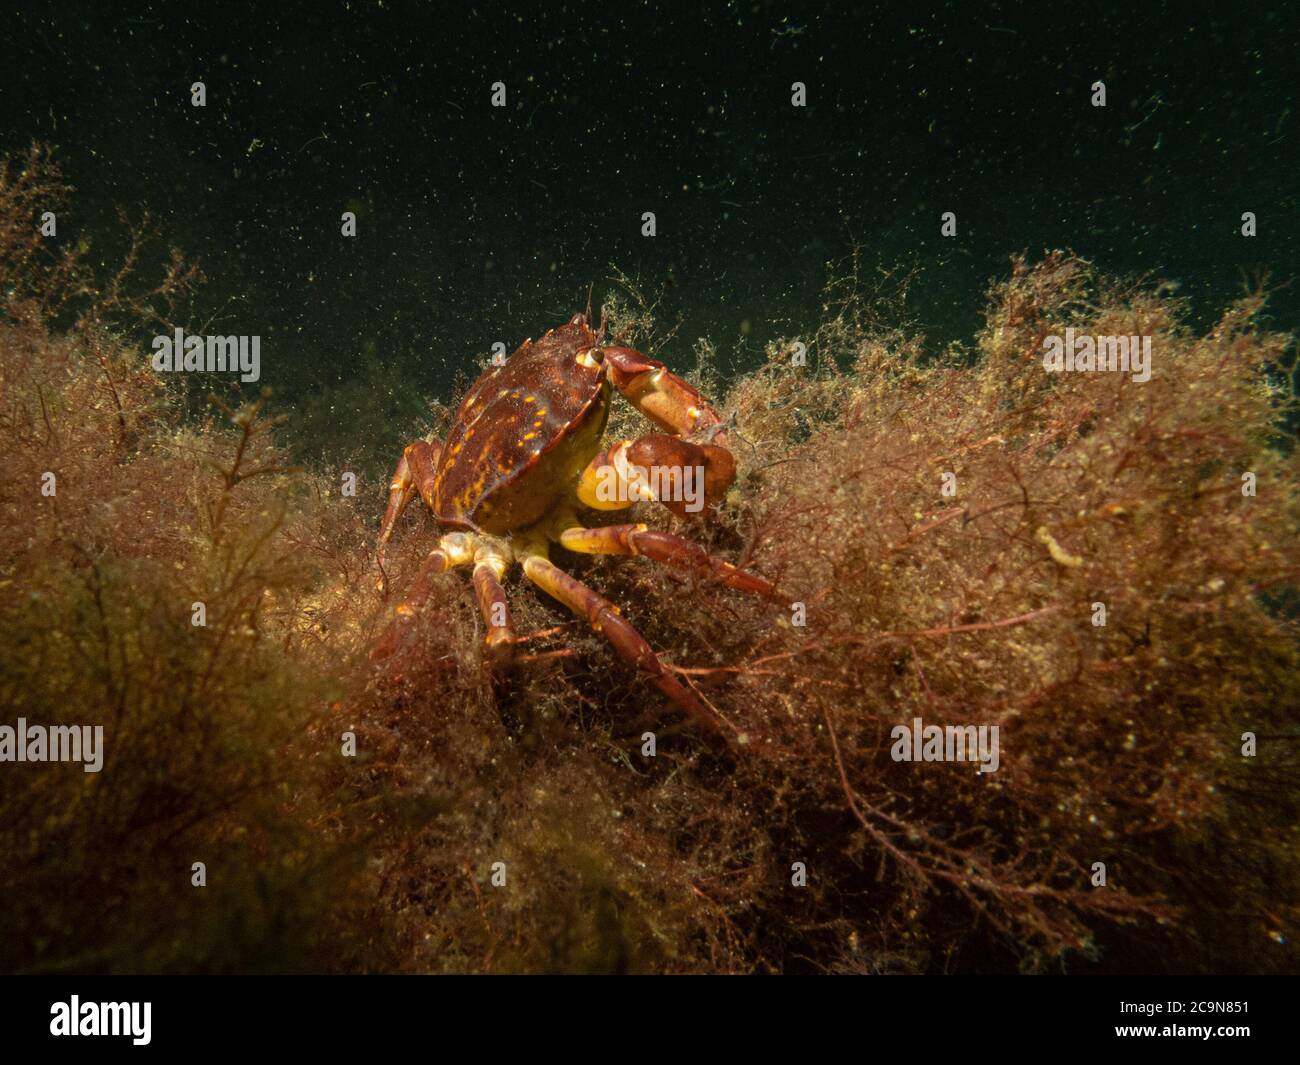 A closeup underwater picture of a crab taking shelter in seaweed. Picture from Oresund, Malmo in southern Sweden. Stock Photo